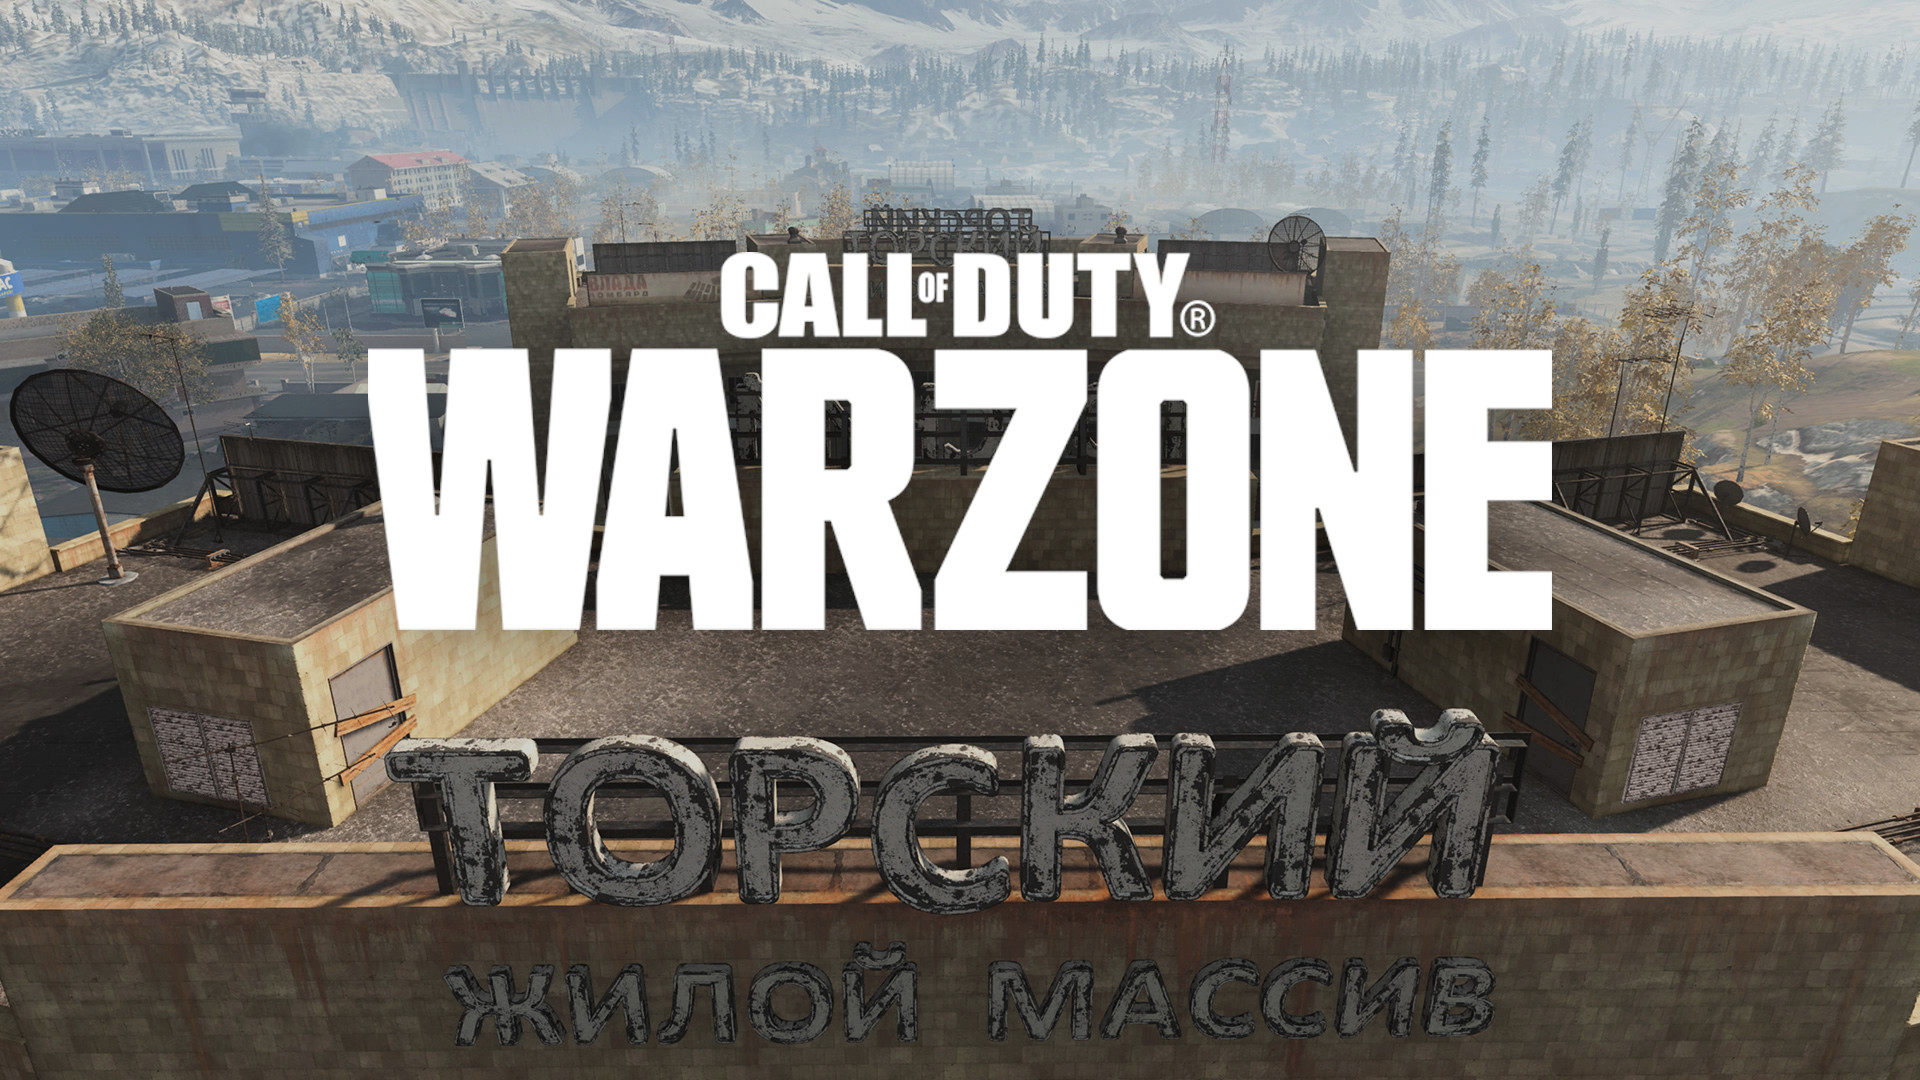 Call of Duty Warzone Slang Begriffe